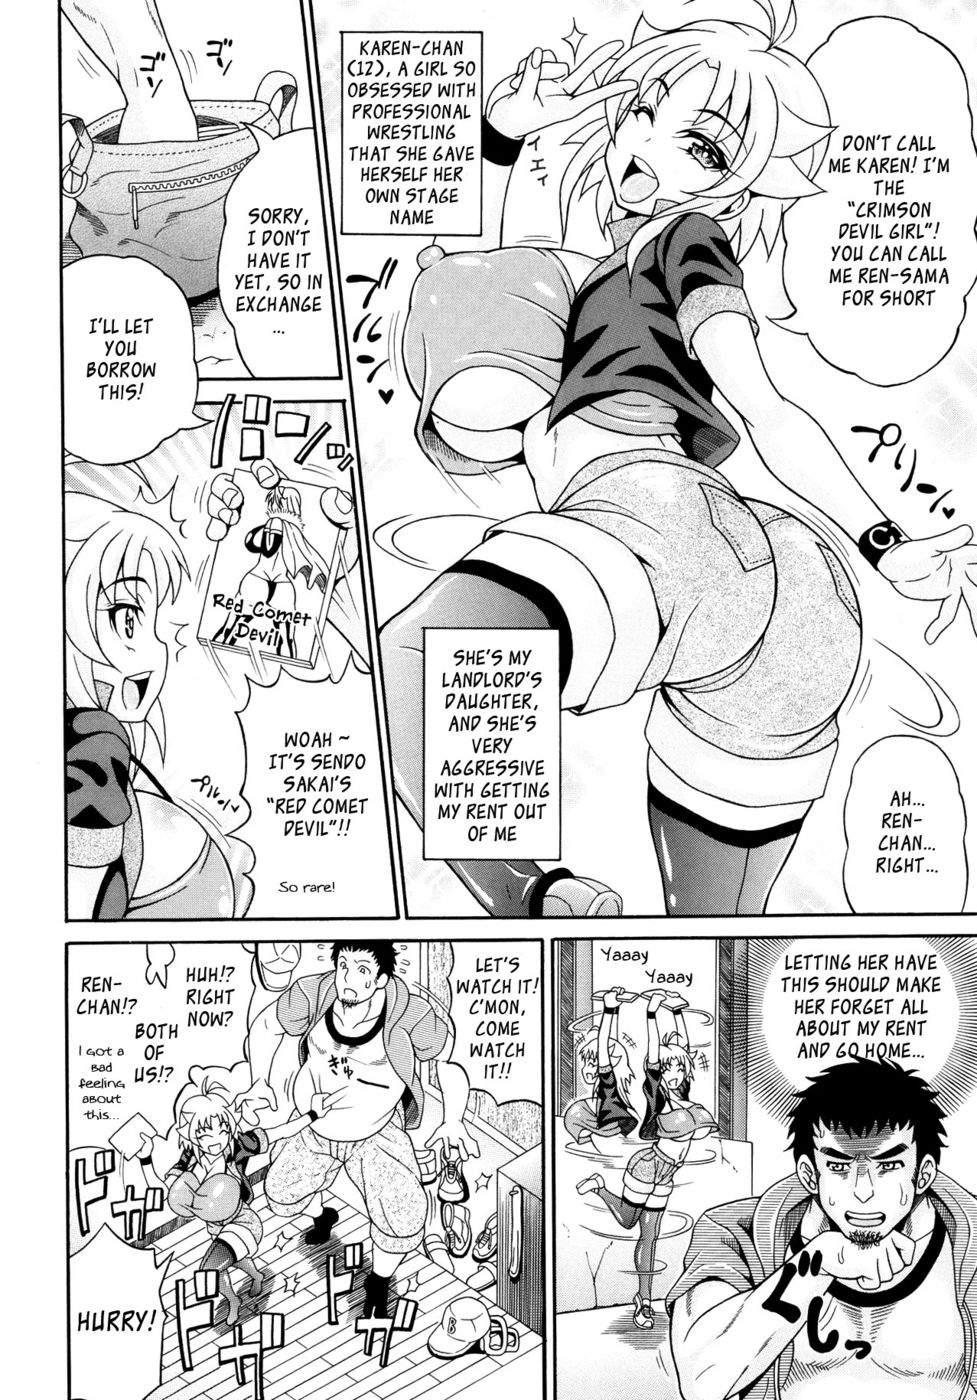 Debt-Collector Devil Girl vs The Raging Bull - Fuck-Read-Hentai Manga  Hentai Comic - Page: 2 - Online porn video at mobile